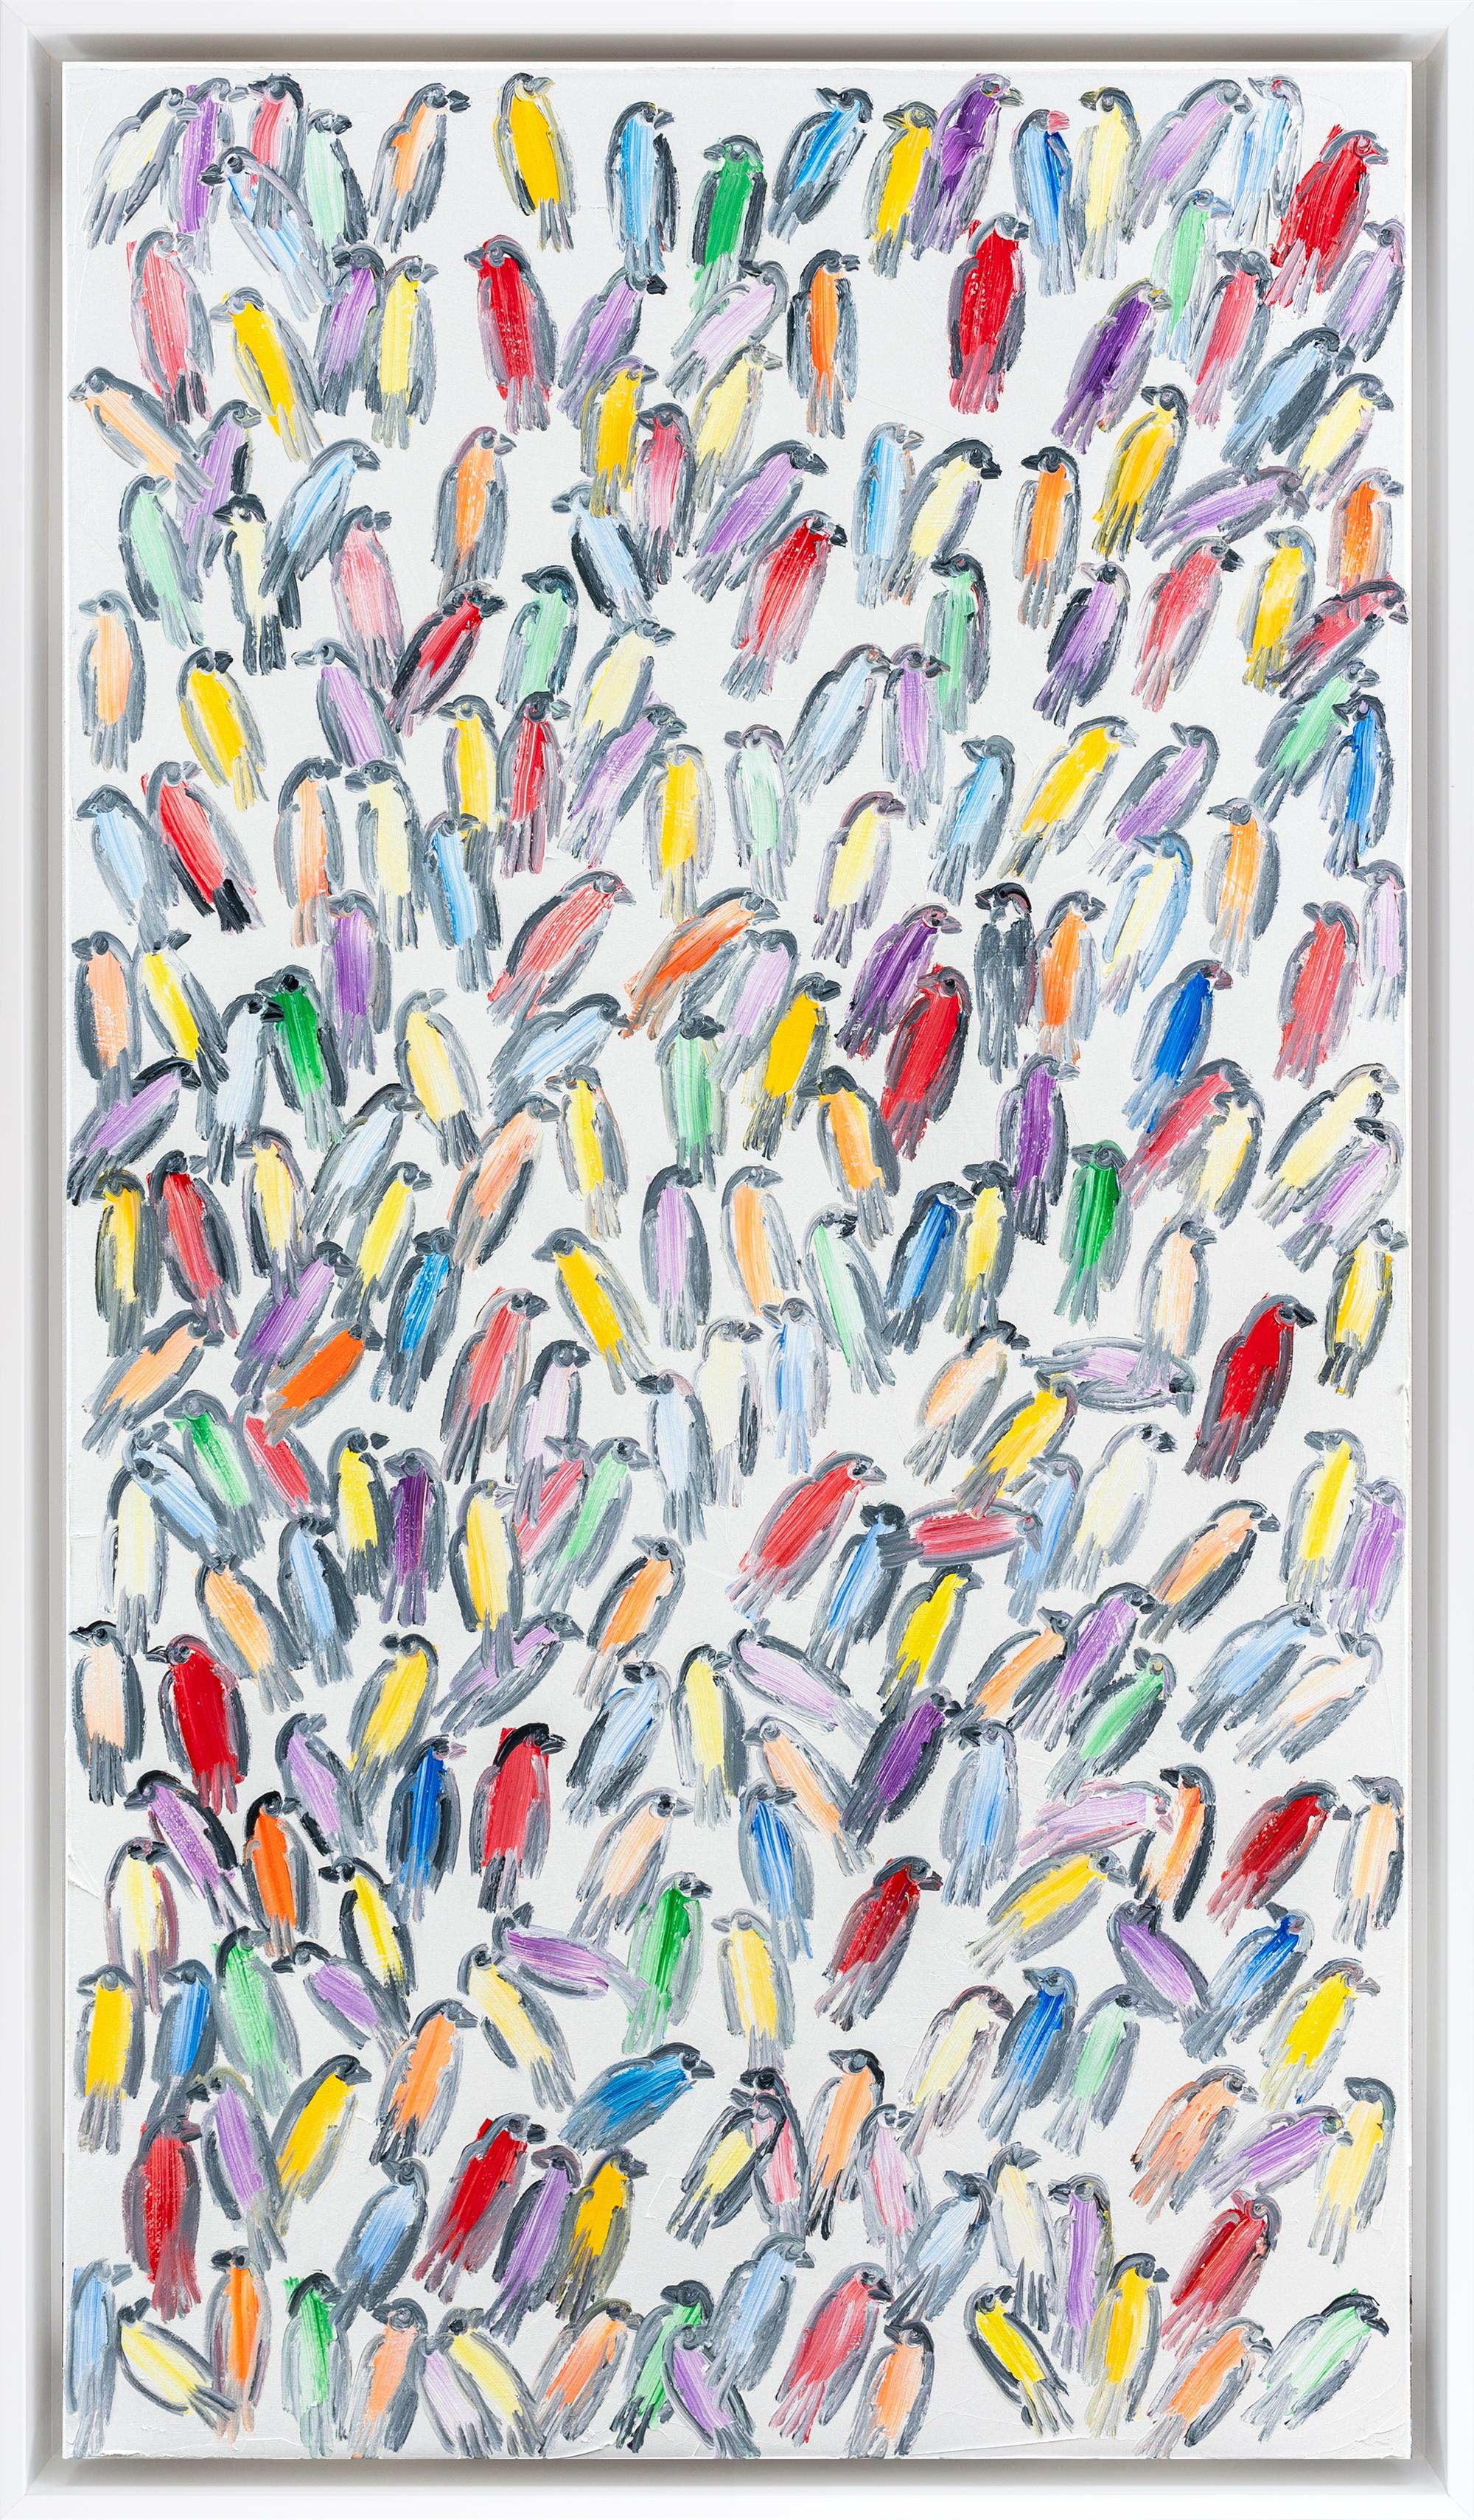 "Finches New Orleans" is a framed Neo-expressionist oil painting on canvas by Hunt Slonem depicting a large group of colorful birds set against a white background. 

This piece is finished in a pure white floater frame. Pricing includes the pictured